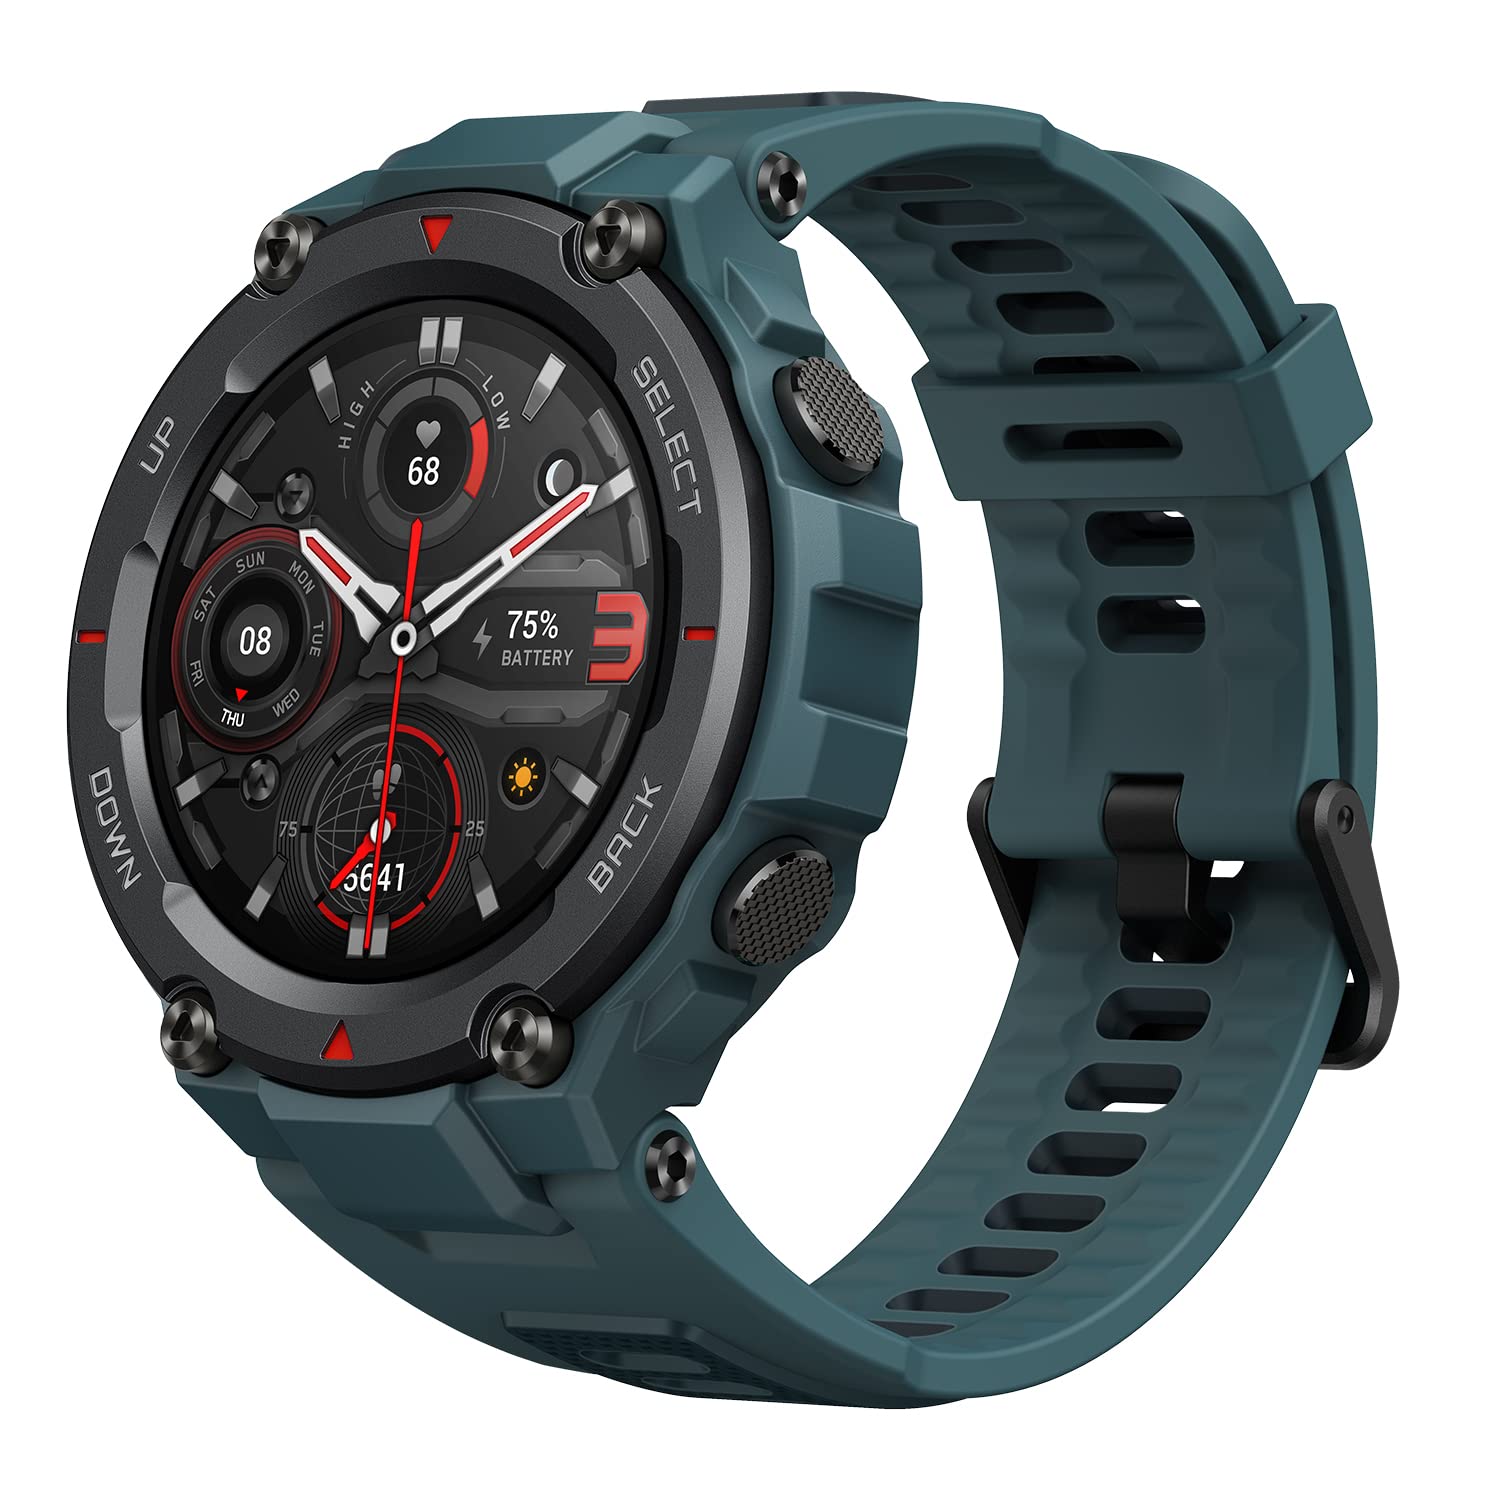 Amazfit T-Rex Pro Smart Watch for Men Rugged Outdoor GPS Fitness Watch, 15 Military Standard Certified, 100+ Sports Modes, 10 ATM Water-Resistant, 18 Day Battery Life, Blood Oxygen Monitor, Blue